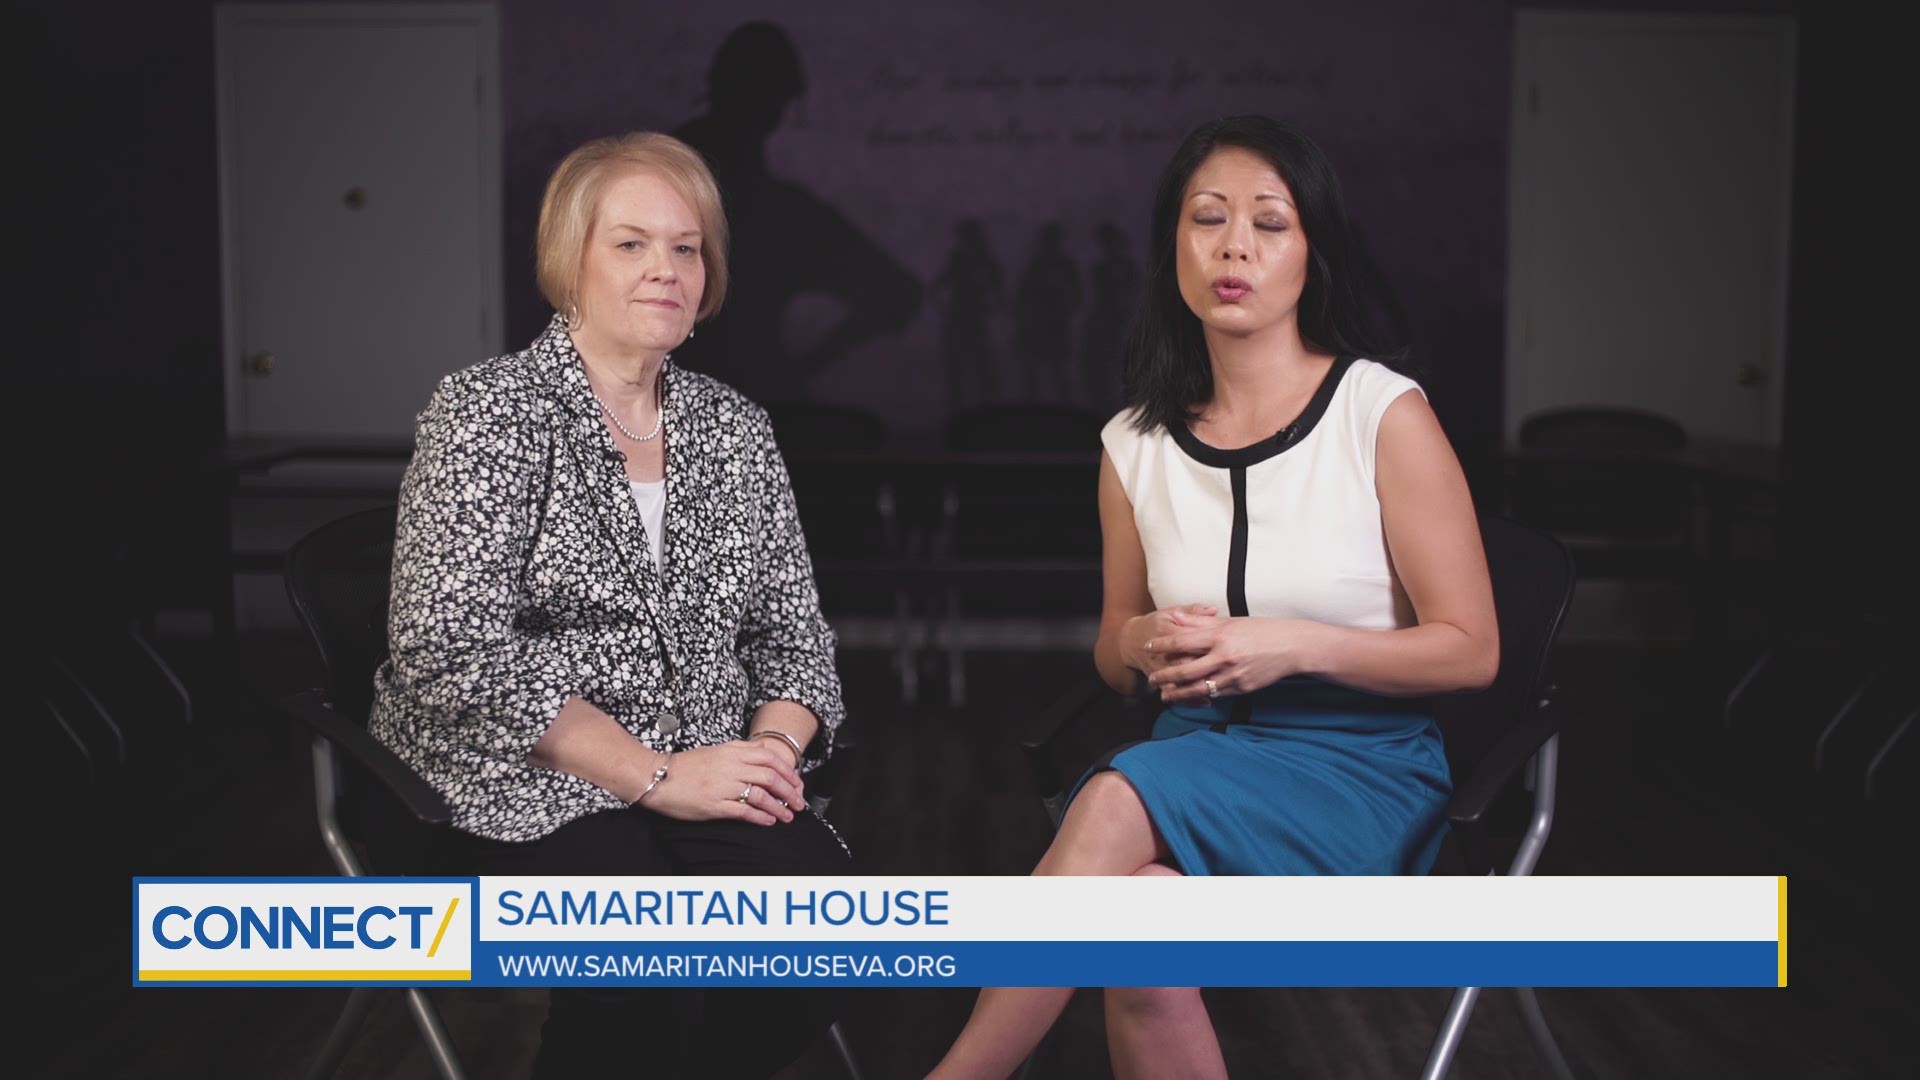 The Samaritan House has been a safe place for women in need for 35 years. We talked about their involvement in the fight against human trafficking.